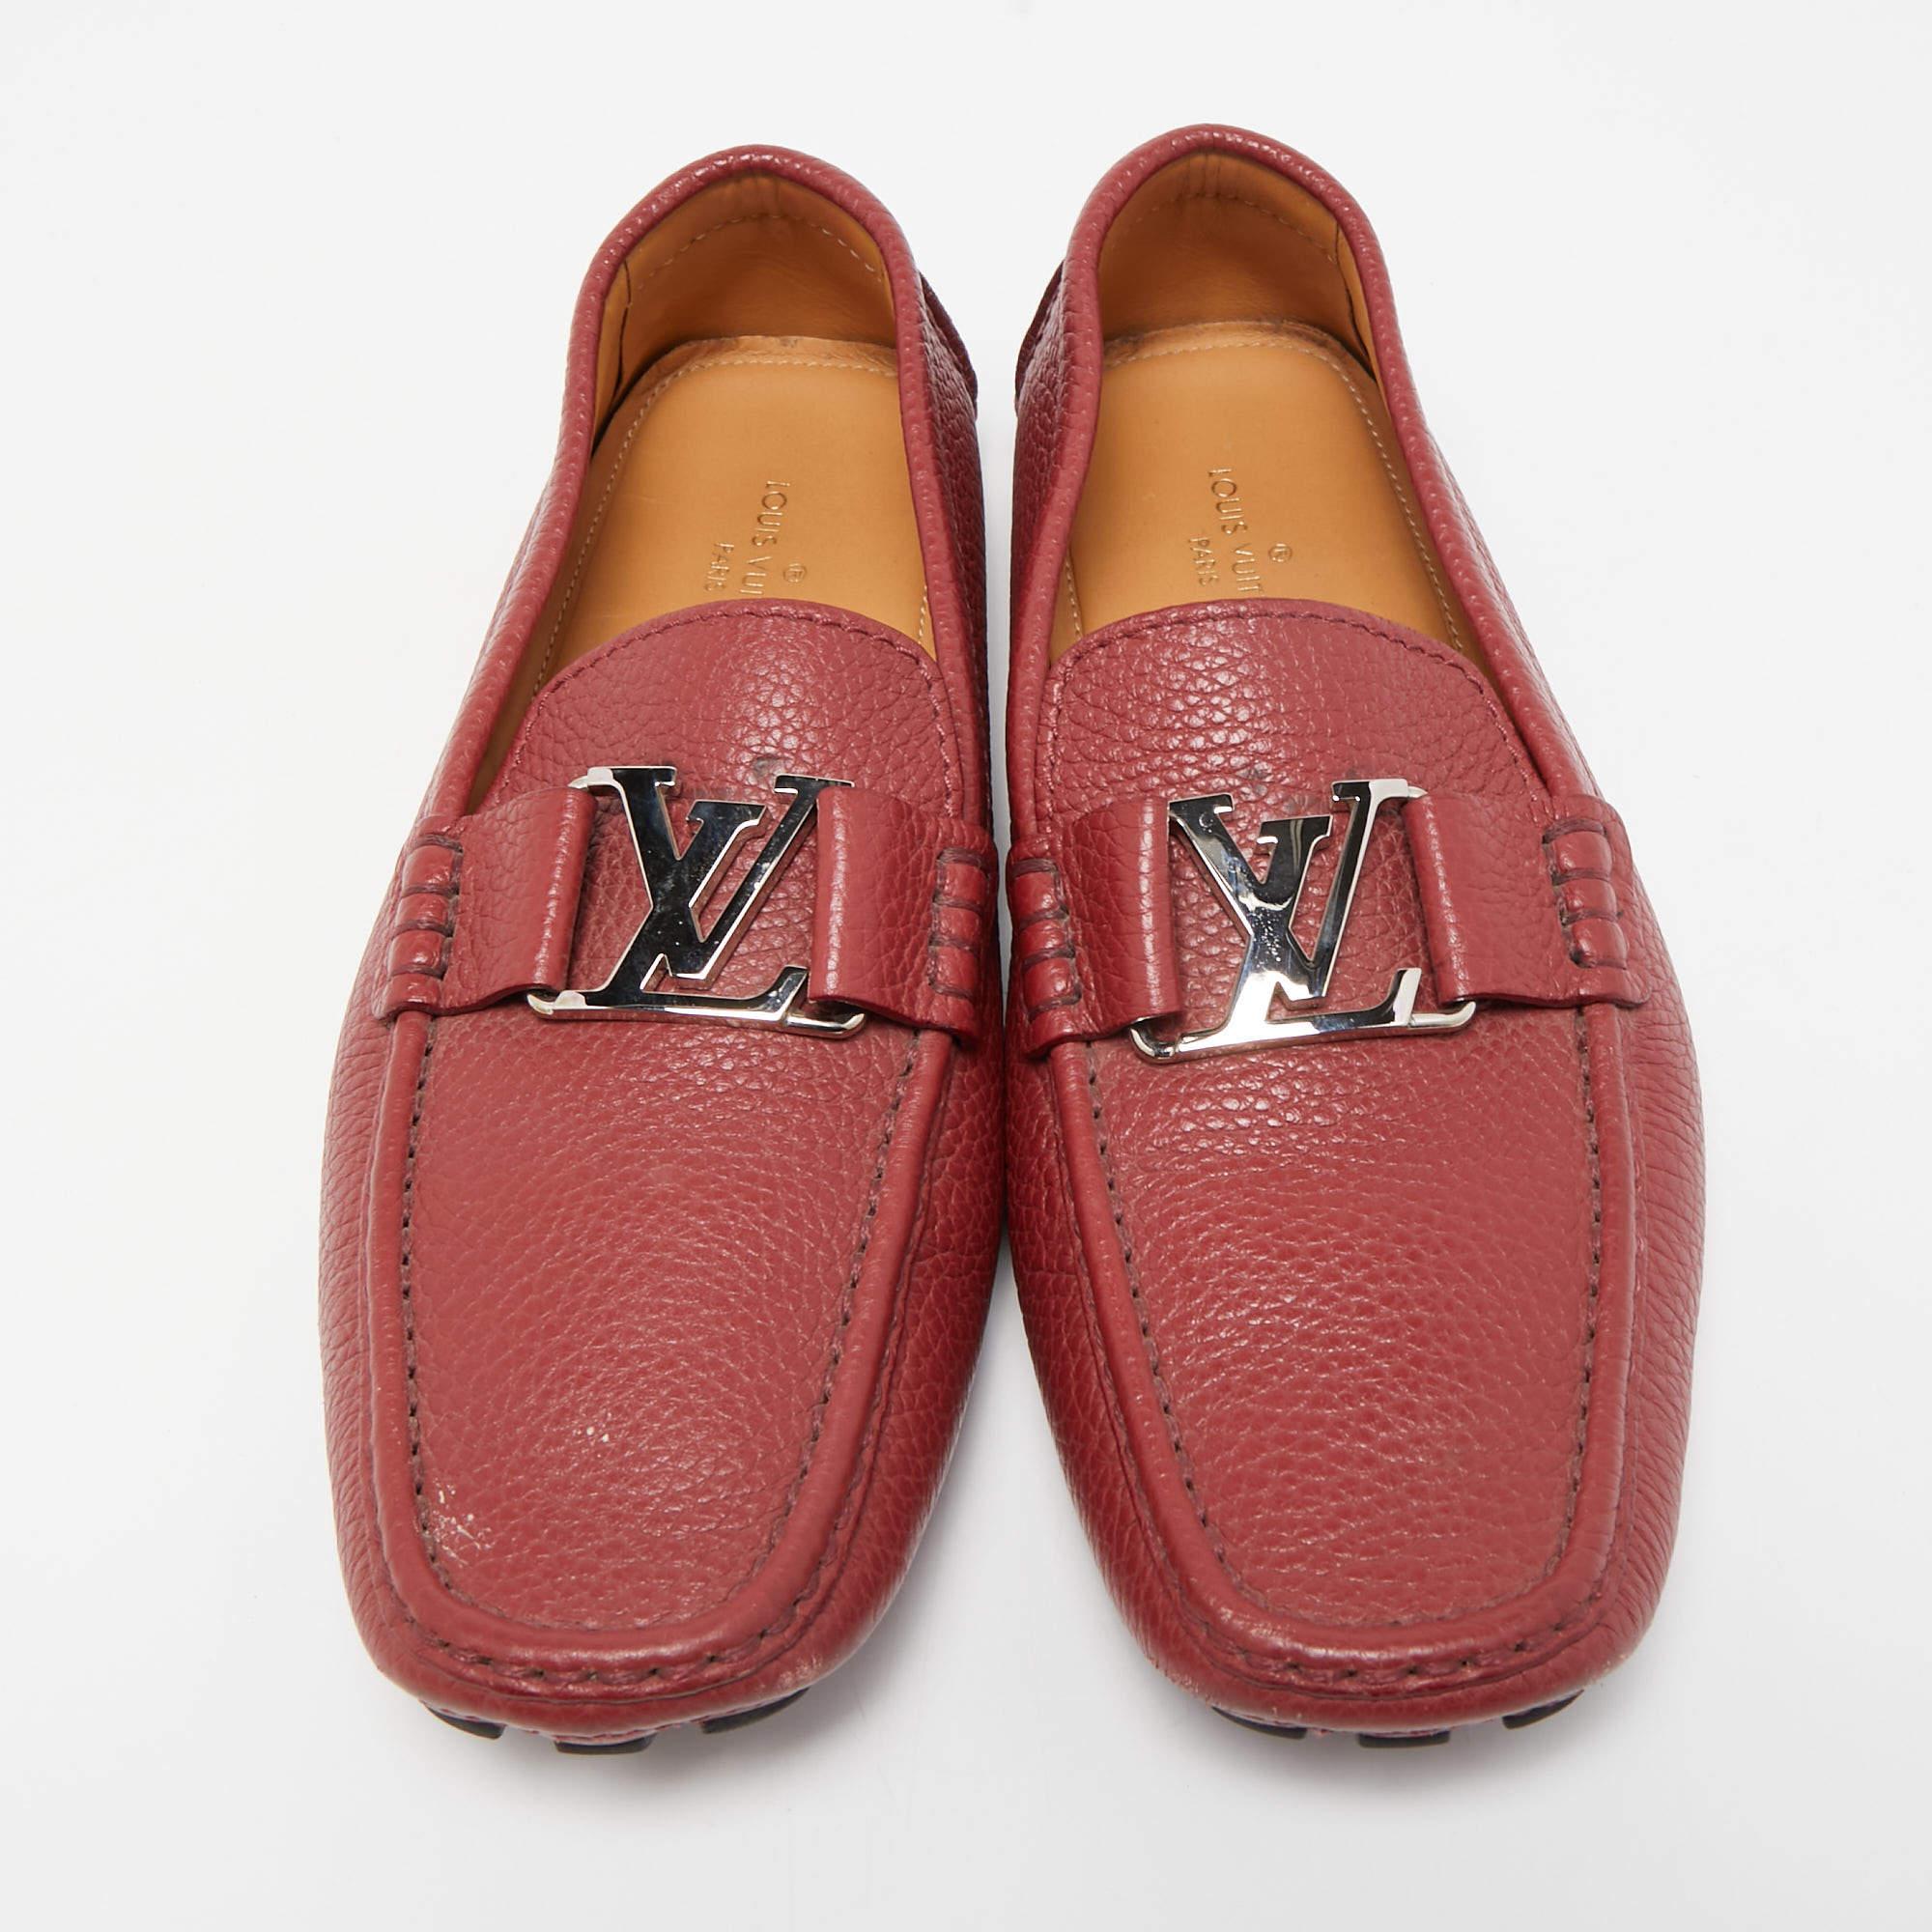 Practical, fashionable, and durable—these designer loafers are carefully built to be fine companions to your formal style. They come made using the best materials to be a prized buy.

Includes: Original Dustbag

